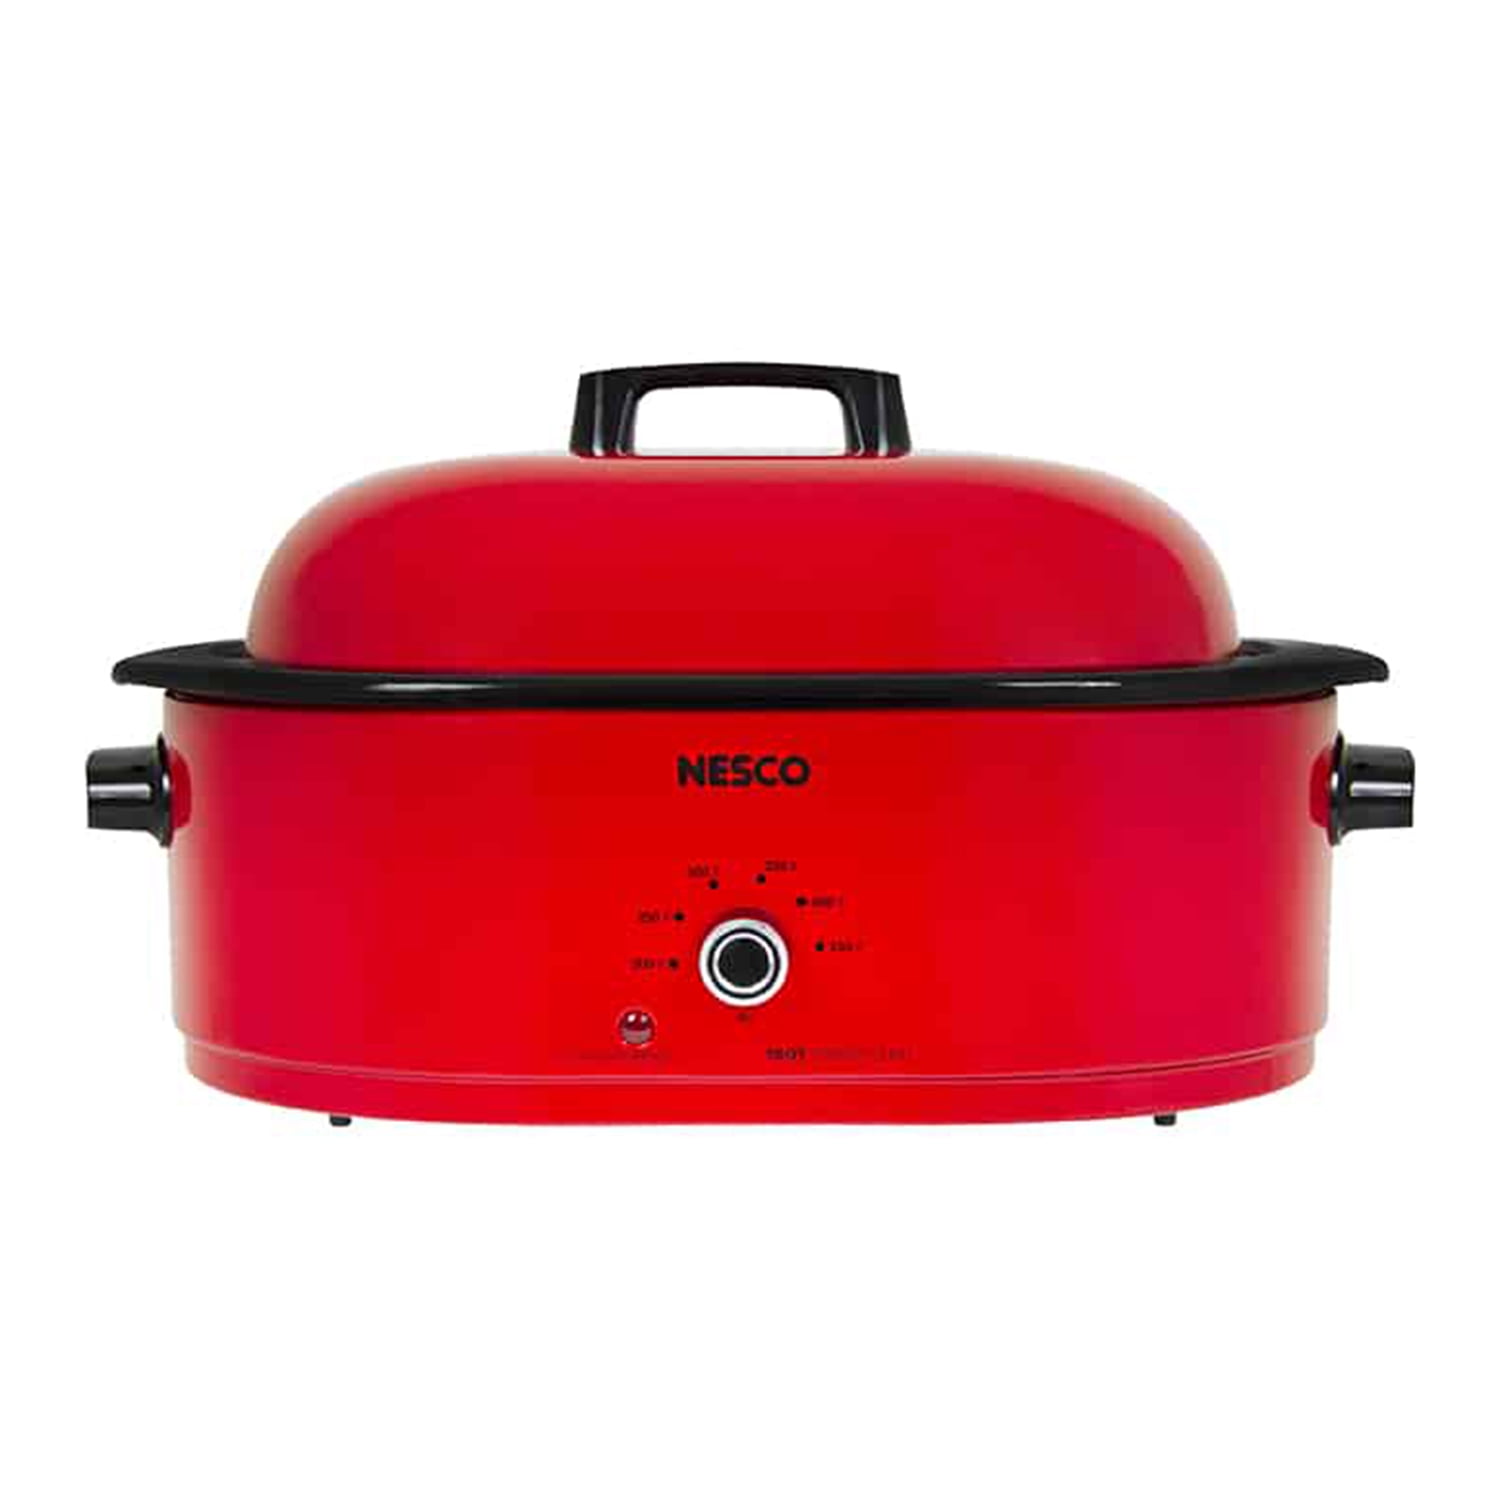 Picture of Nesco 6269807 18 qt. Chrome Red Porcelain Roaster Oven - 12 x 15 x 23.5 in.